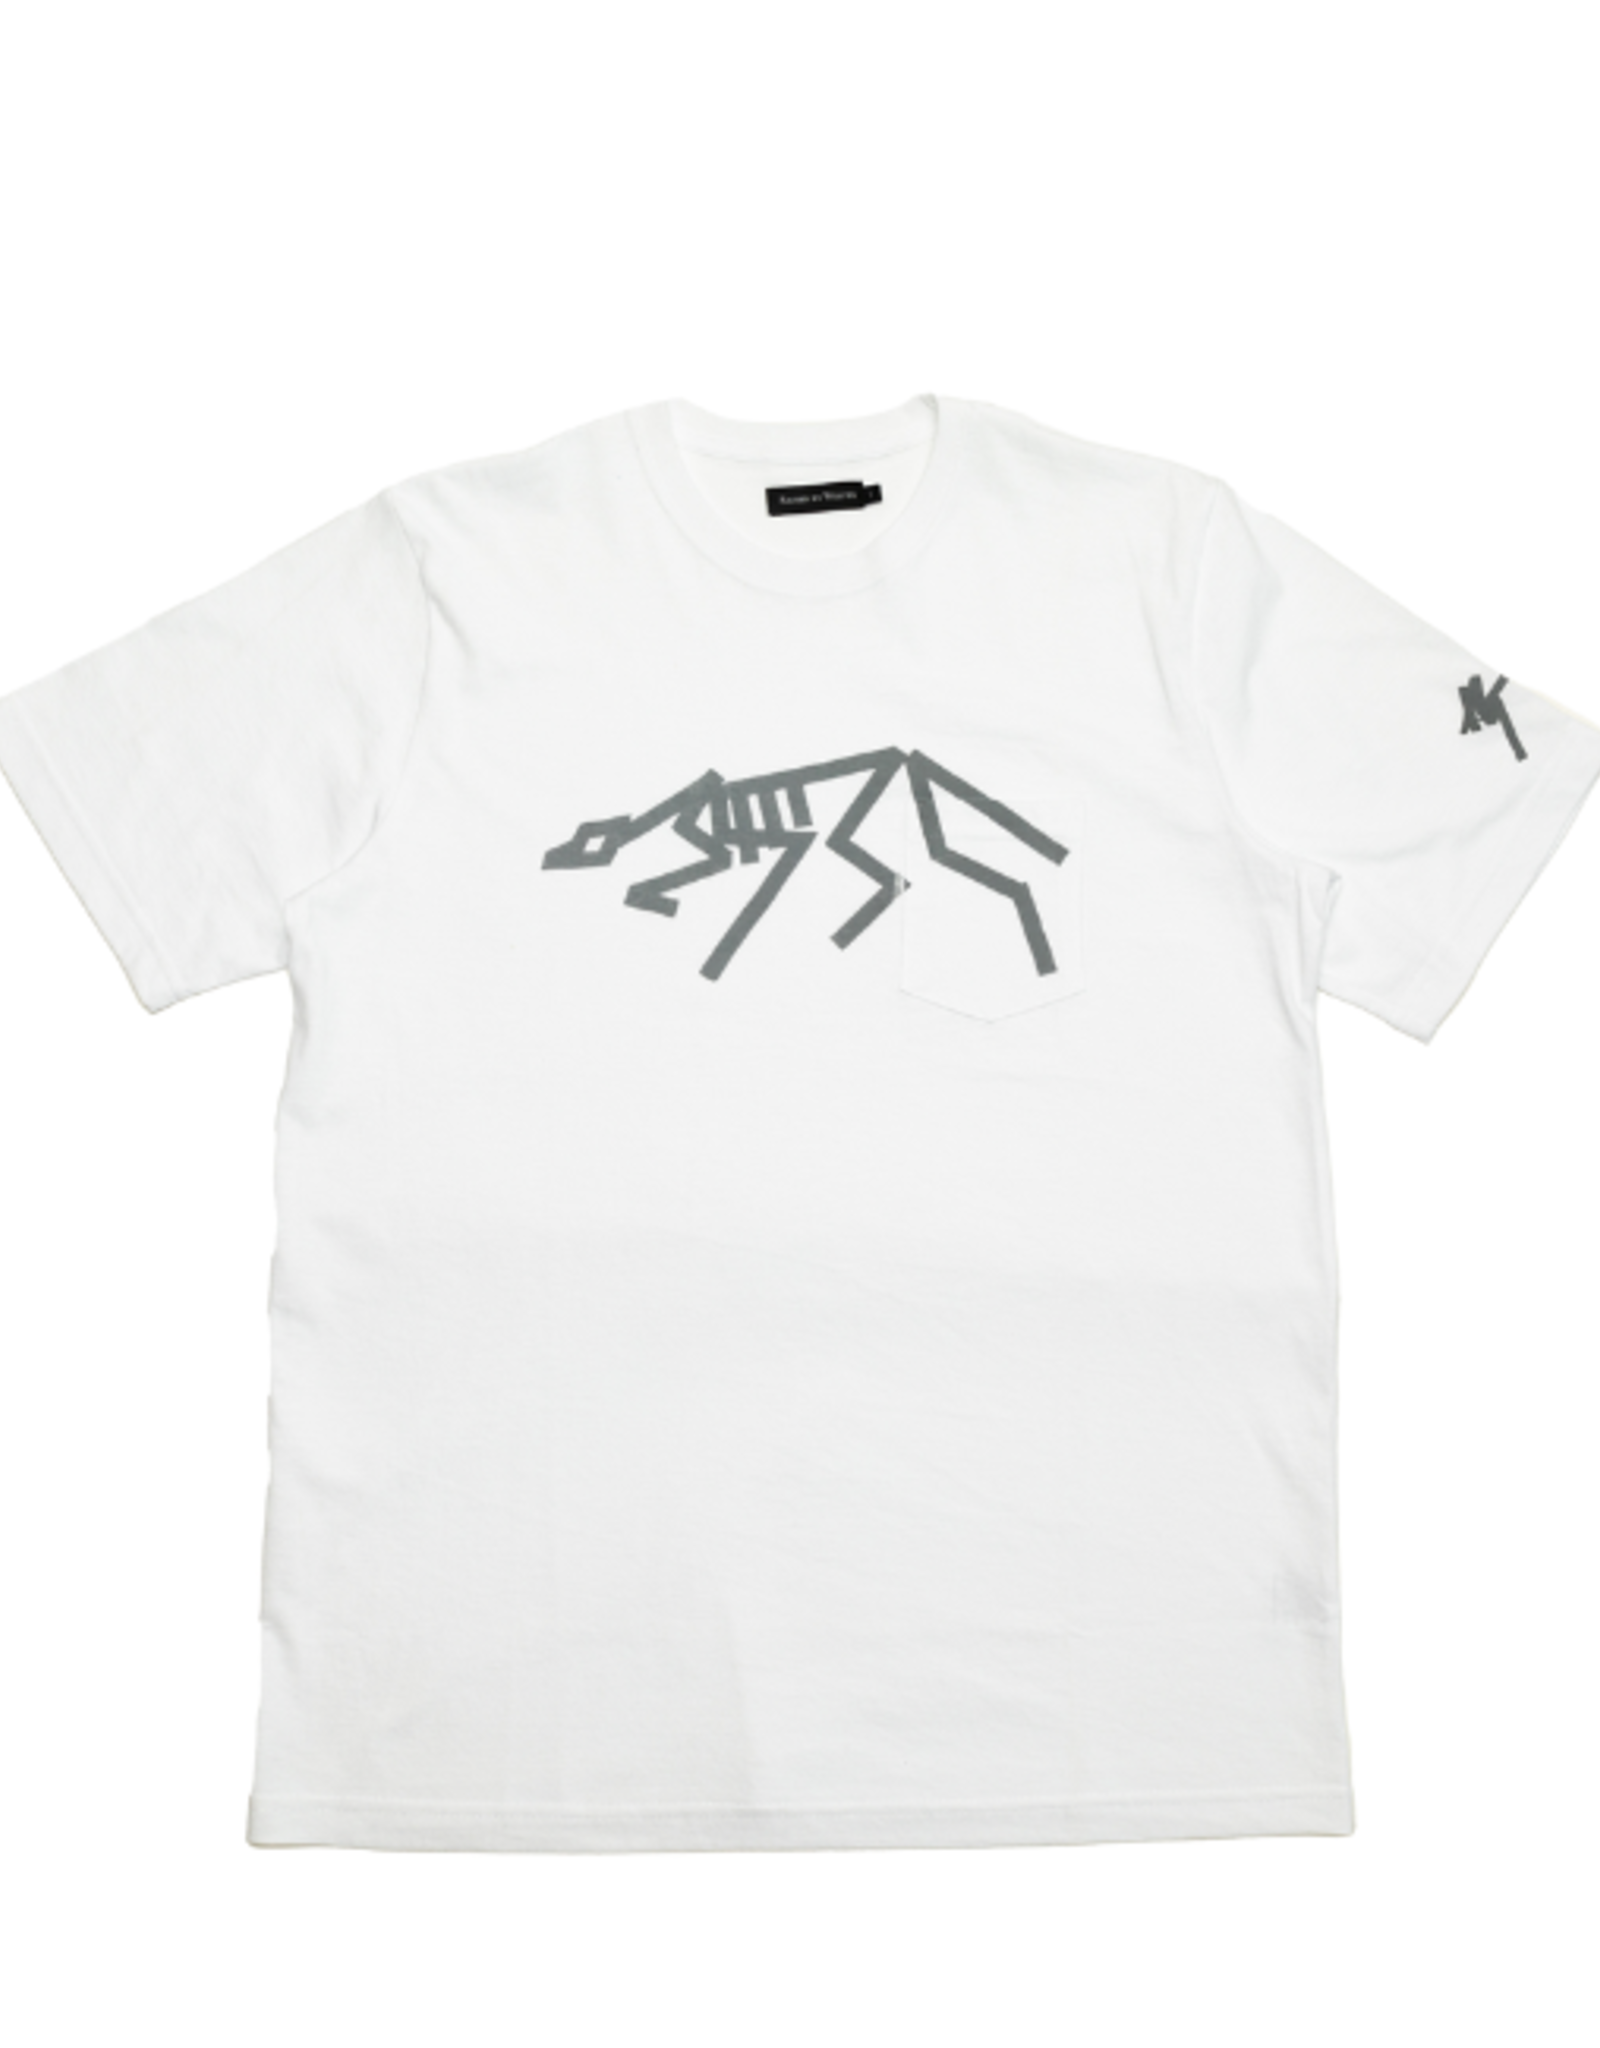 RAISED BY WOLVES RAISED BY WOLVES - AG STALK POCKET TEE WHITE